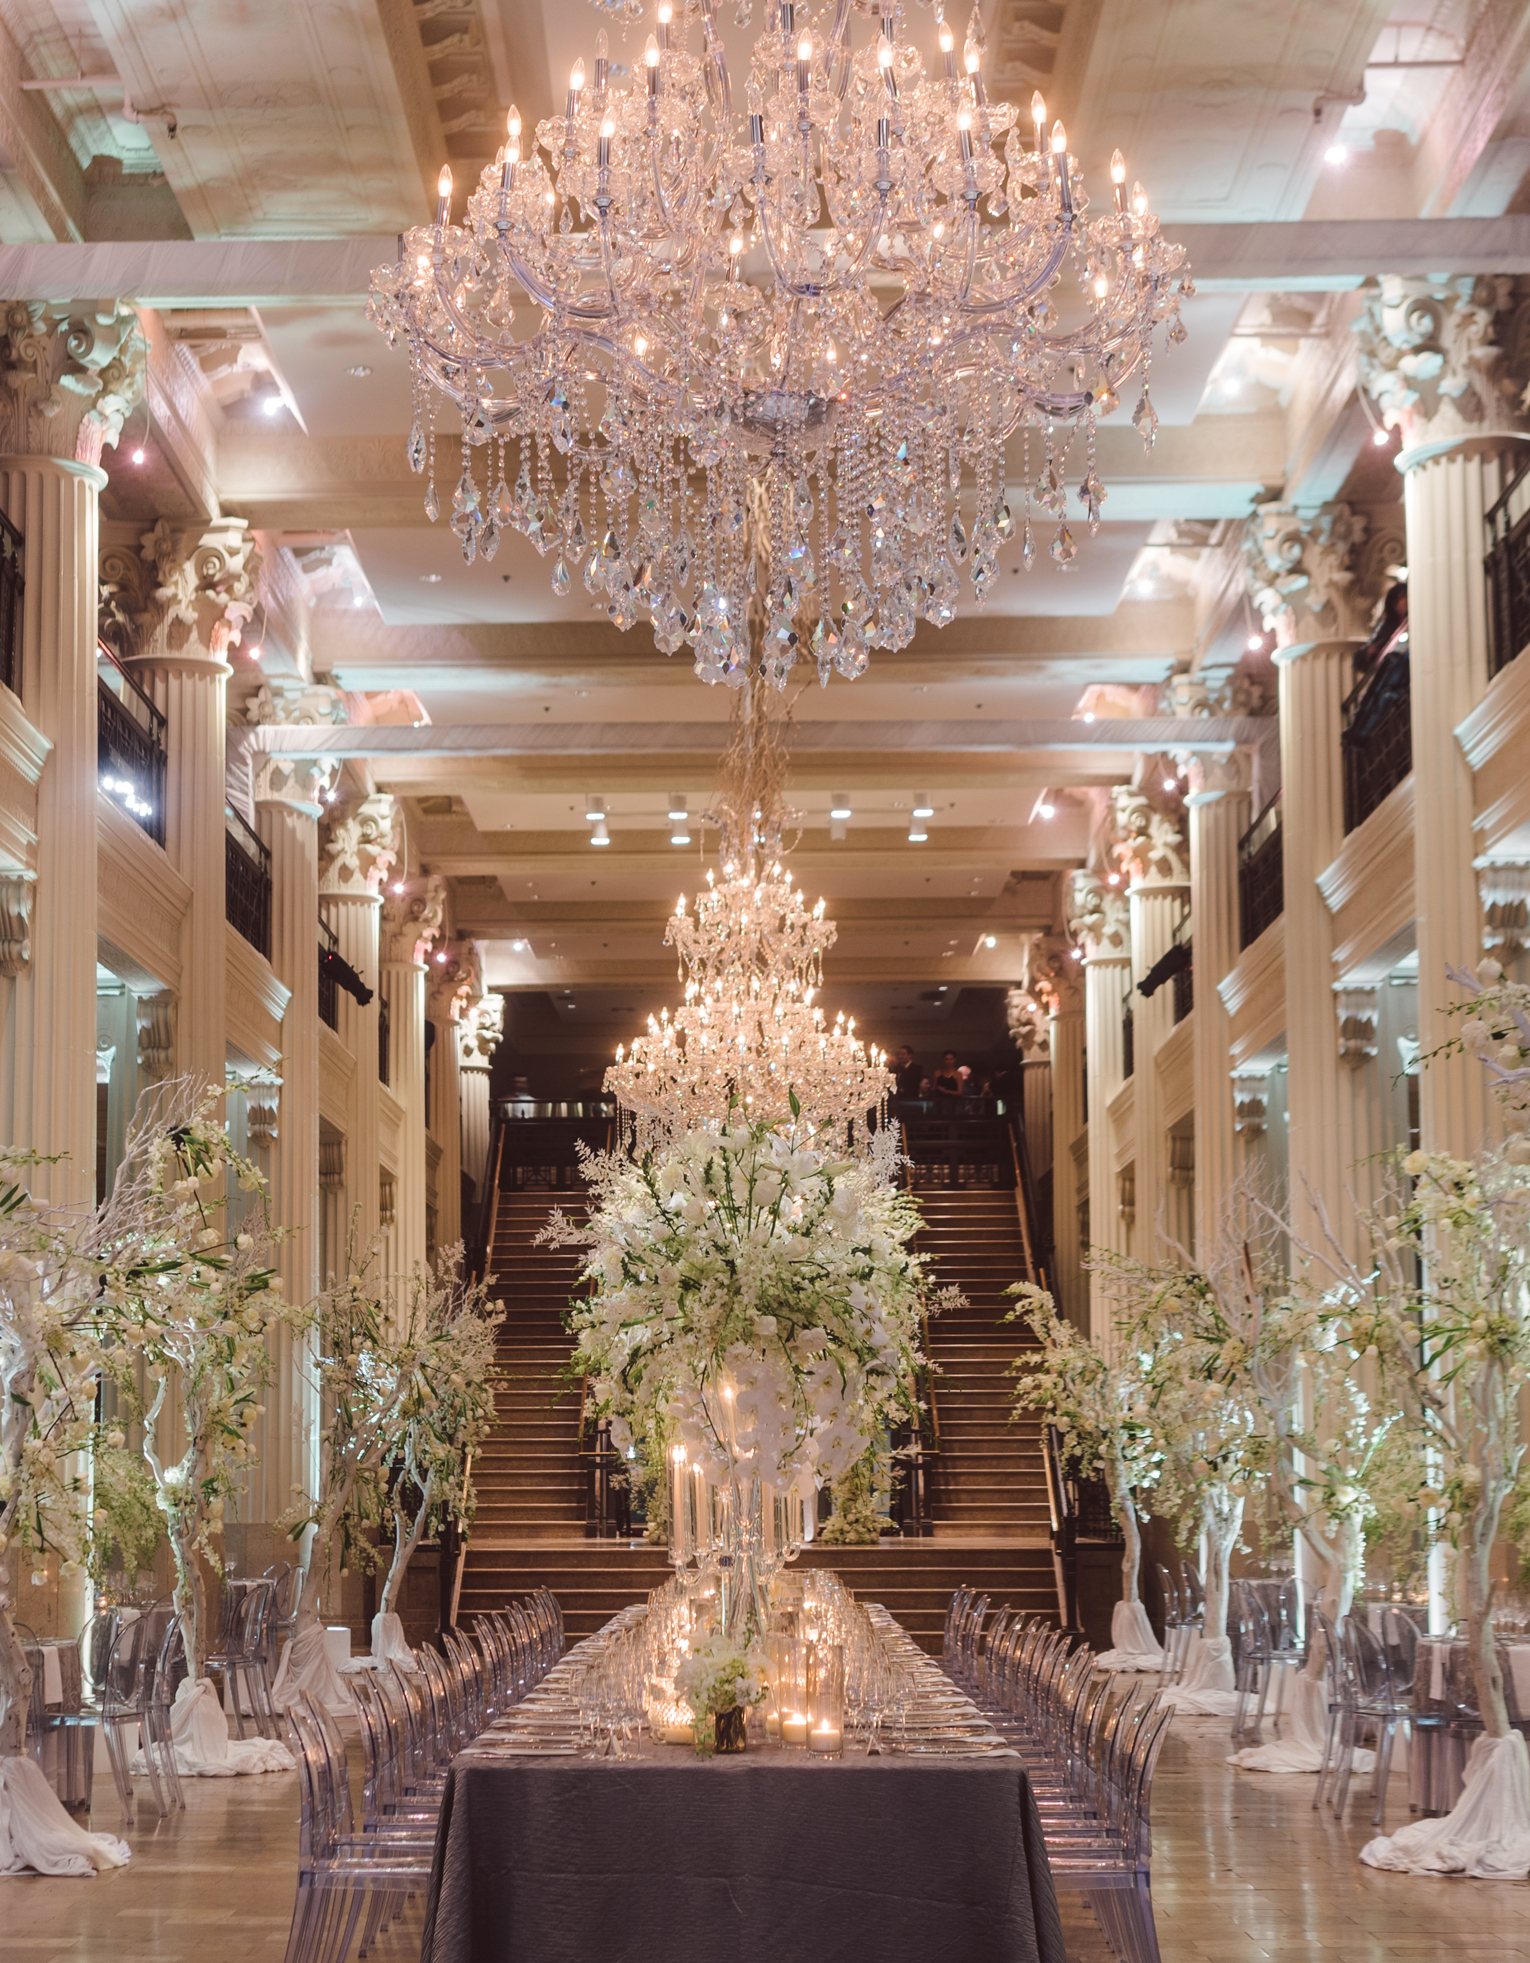 A reception space at Corinthian Houston is decorated with crystal chandeliers and white flower installations surrounding the tall and spacious room.